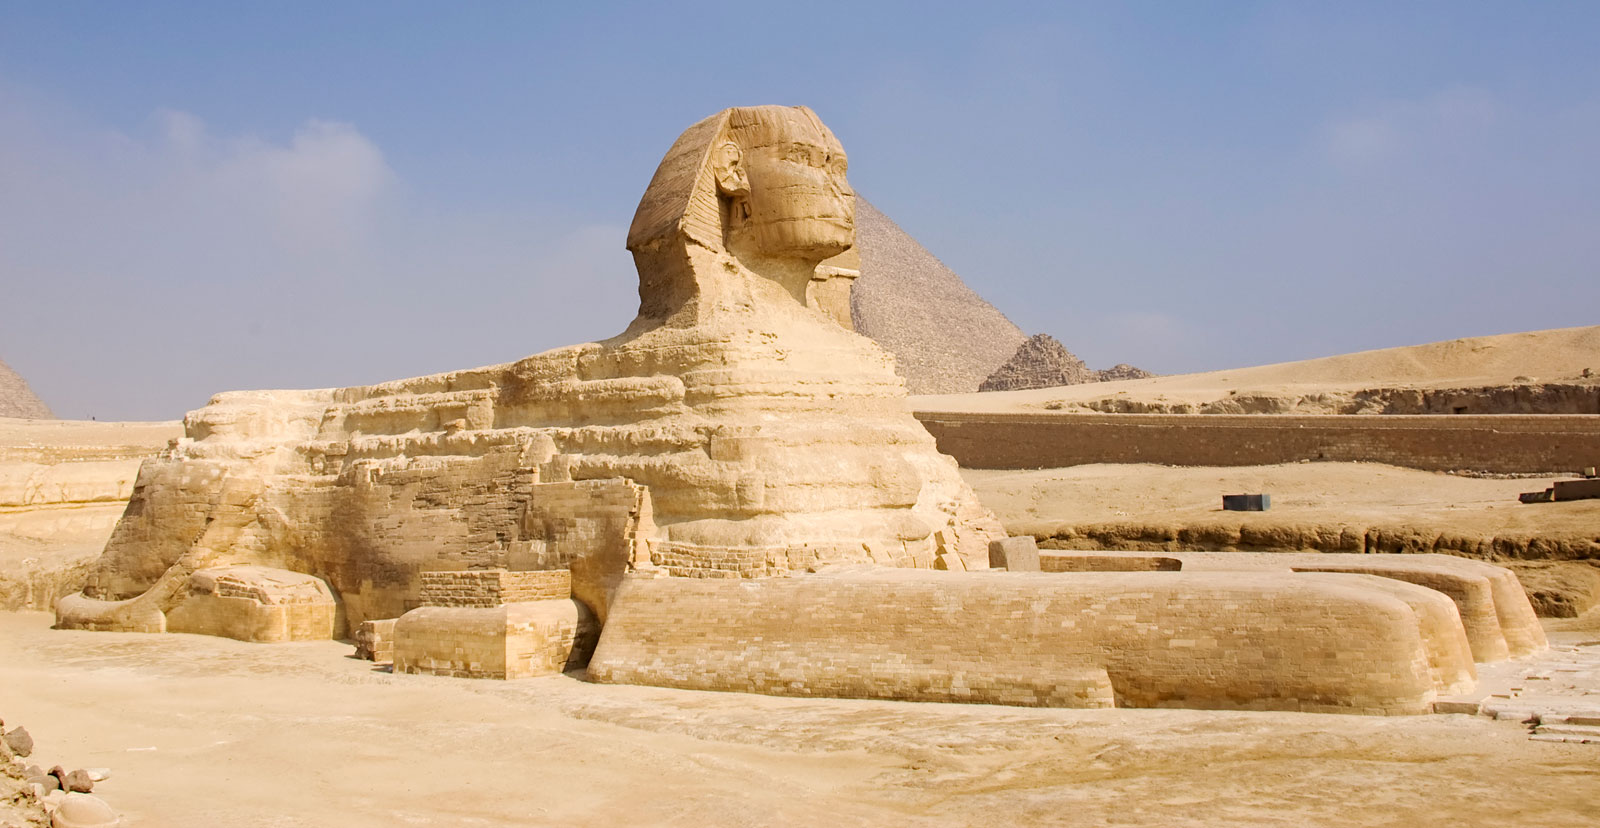 5-Letter Countries Quiz Great Sphinx of Giza, Cairo, Egypt